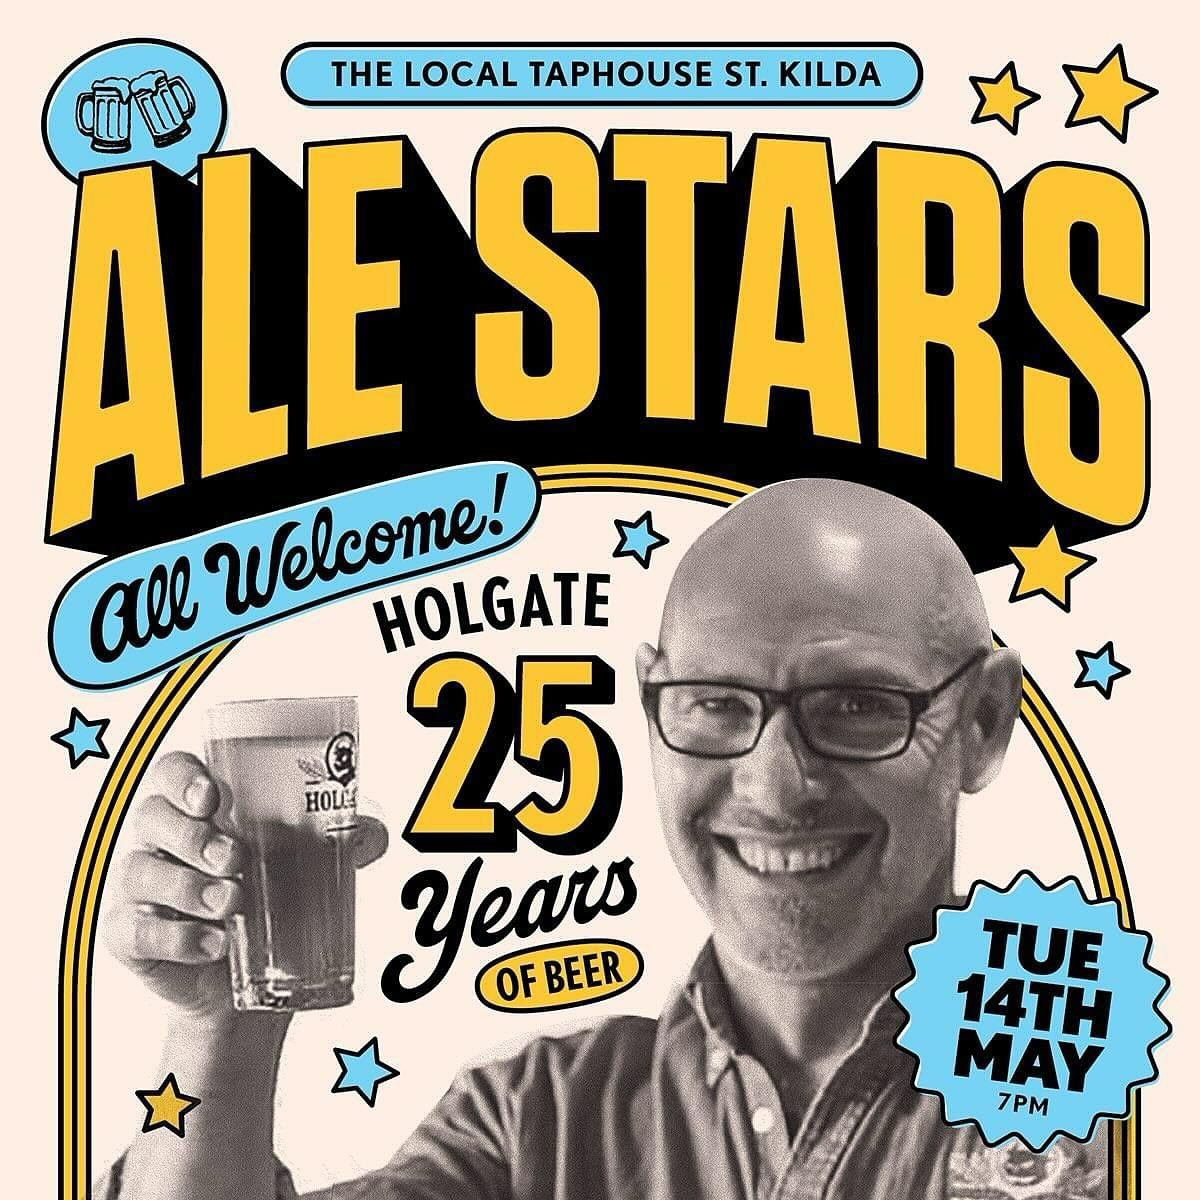 To celebrate the 25th anniversary of Victoria&rsquo;s @holgatebeer, all are welcome to join us on Tuesday May 14th for an Ale Star session at @thelocaltaphousesk with Co-Founder and Head Brewer Paul Holgate.
 
About Holgate:
 
The Holgate Brewery sto